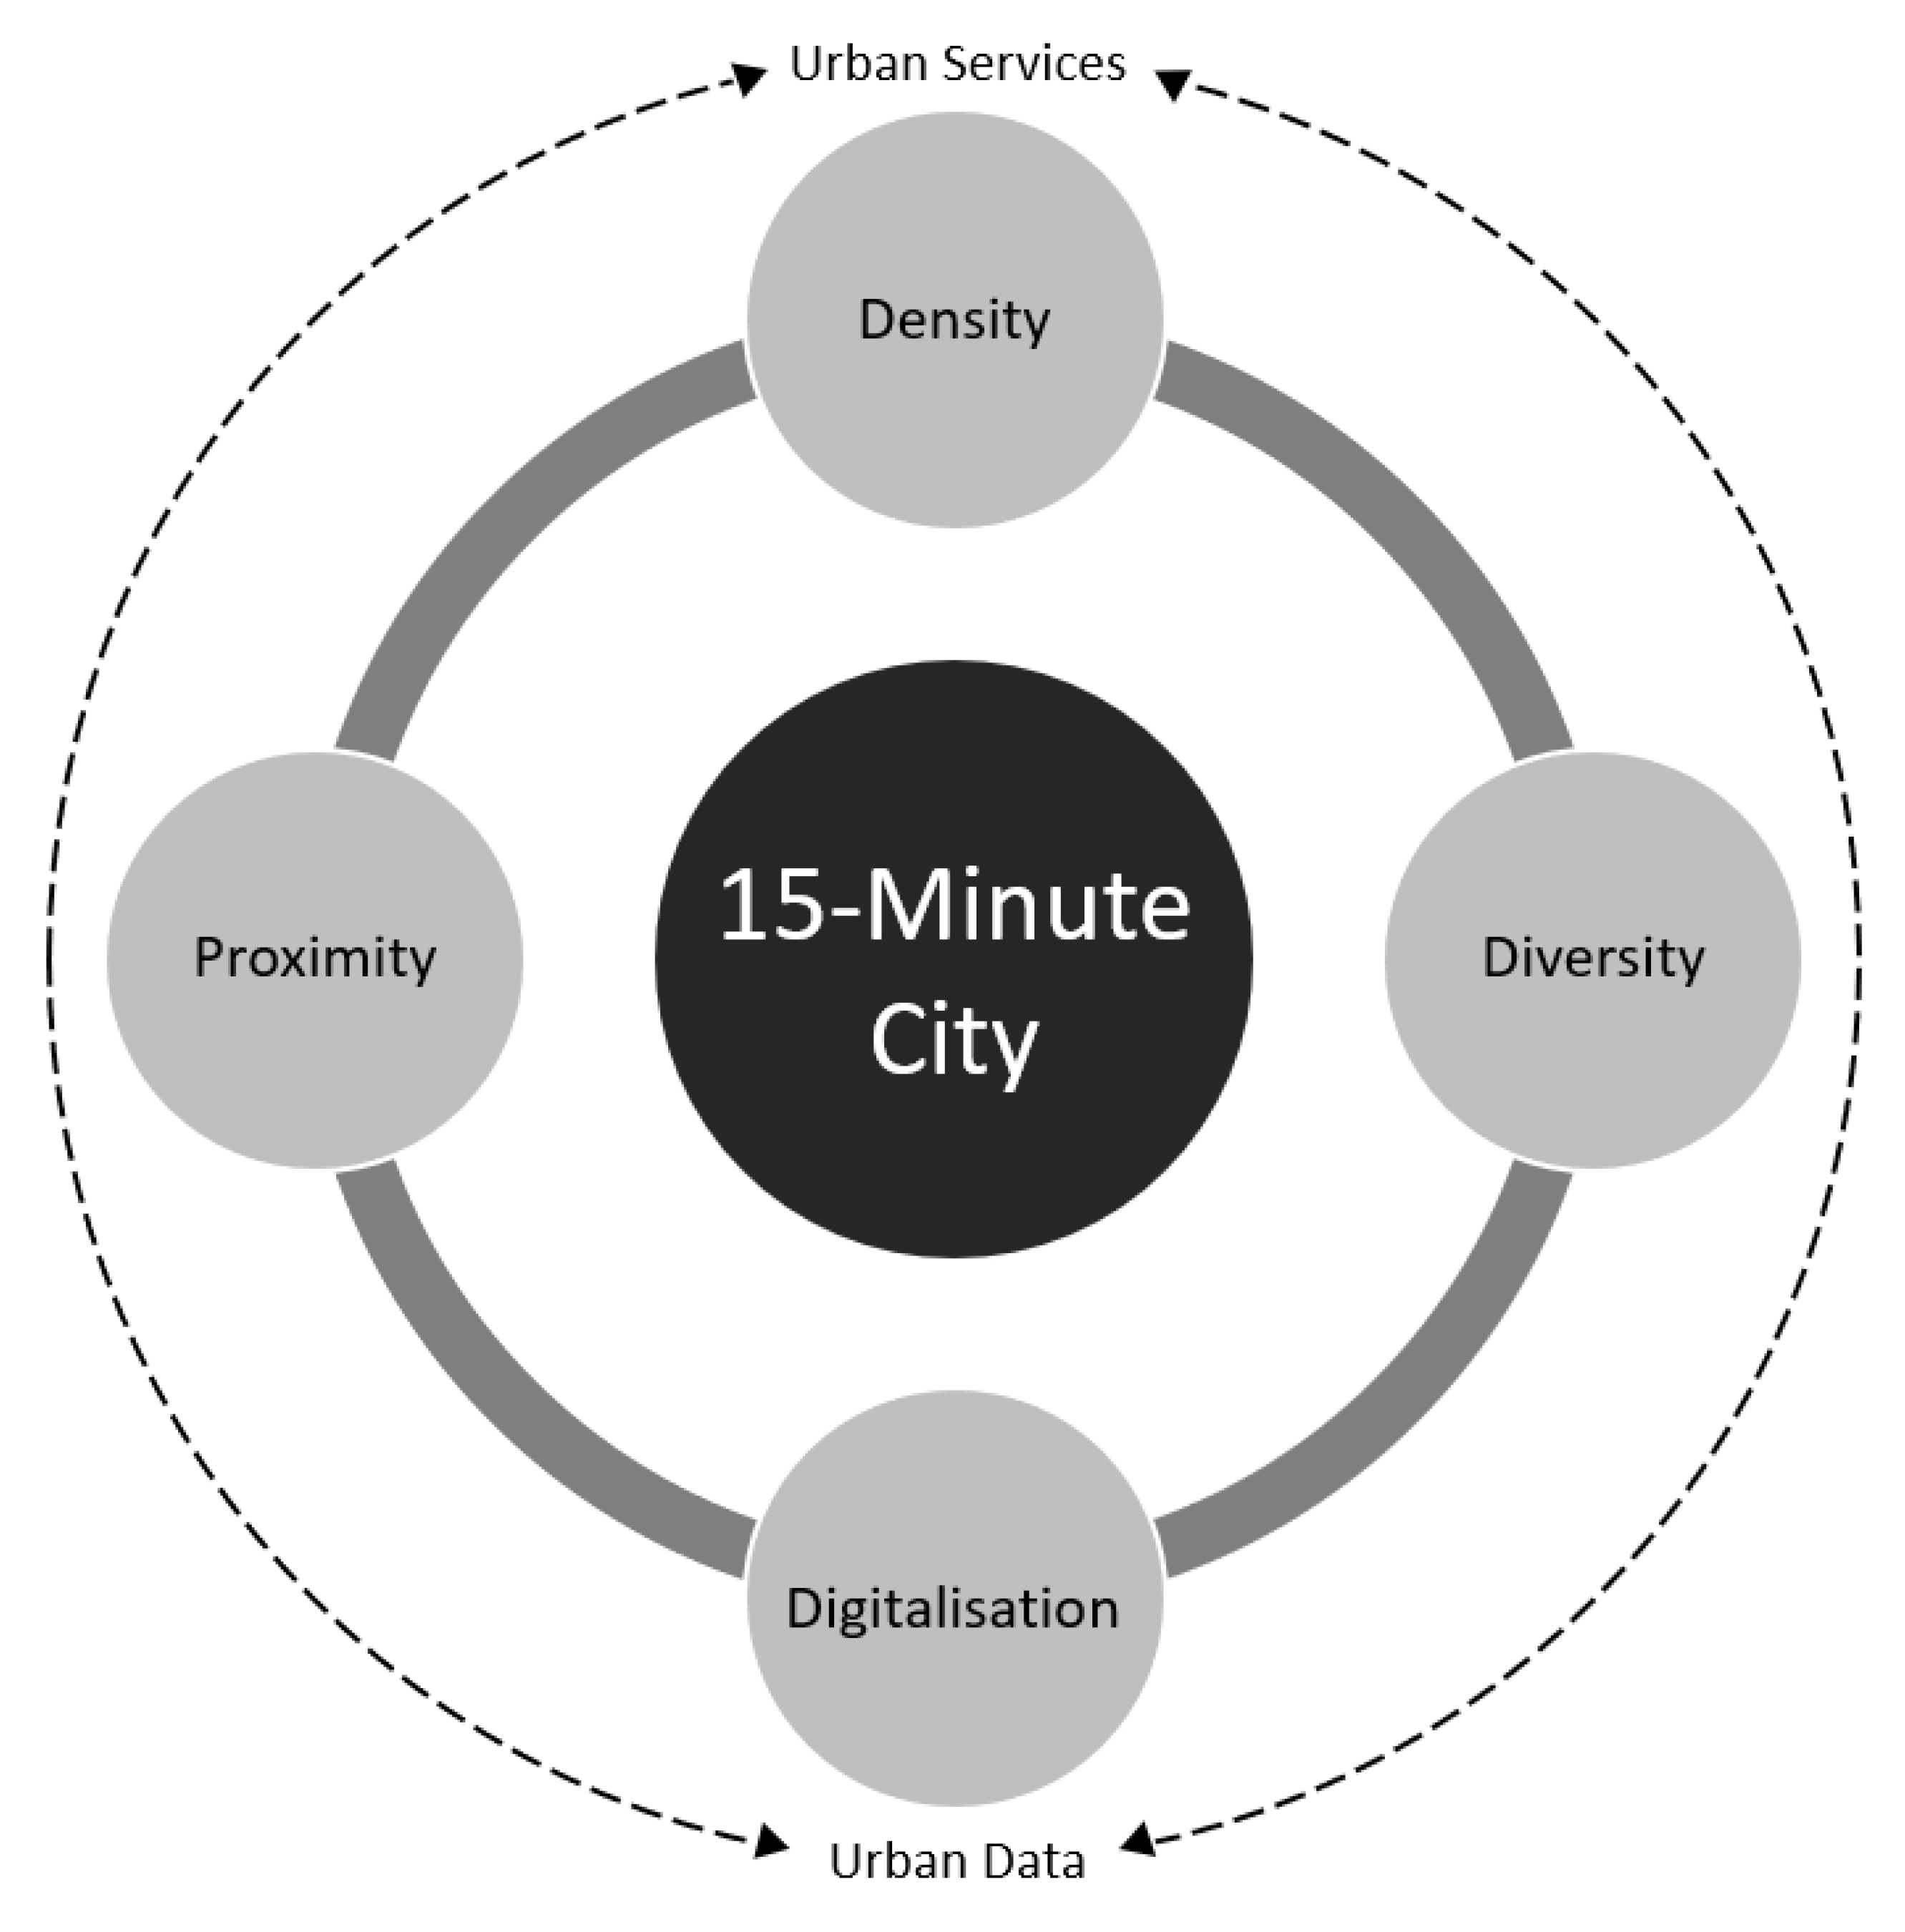 https://www.mdpi.com/smartcities/smartcities-04-00006/article_deploy/html/images/smartcities-04-00006-g001.png